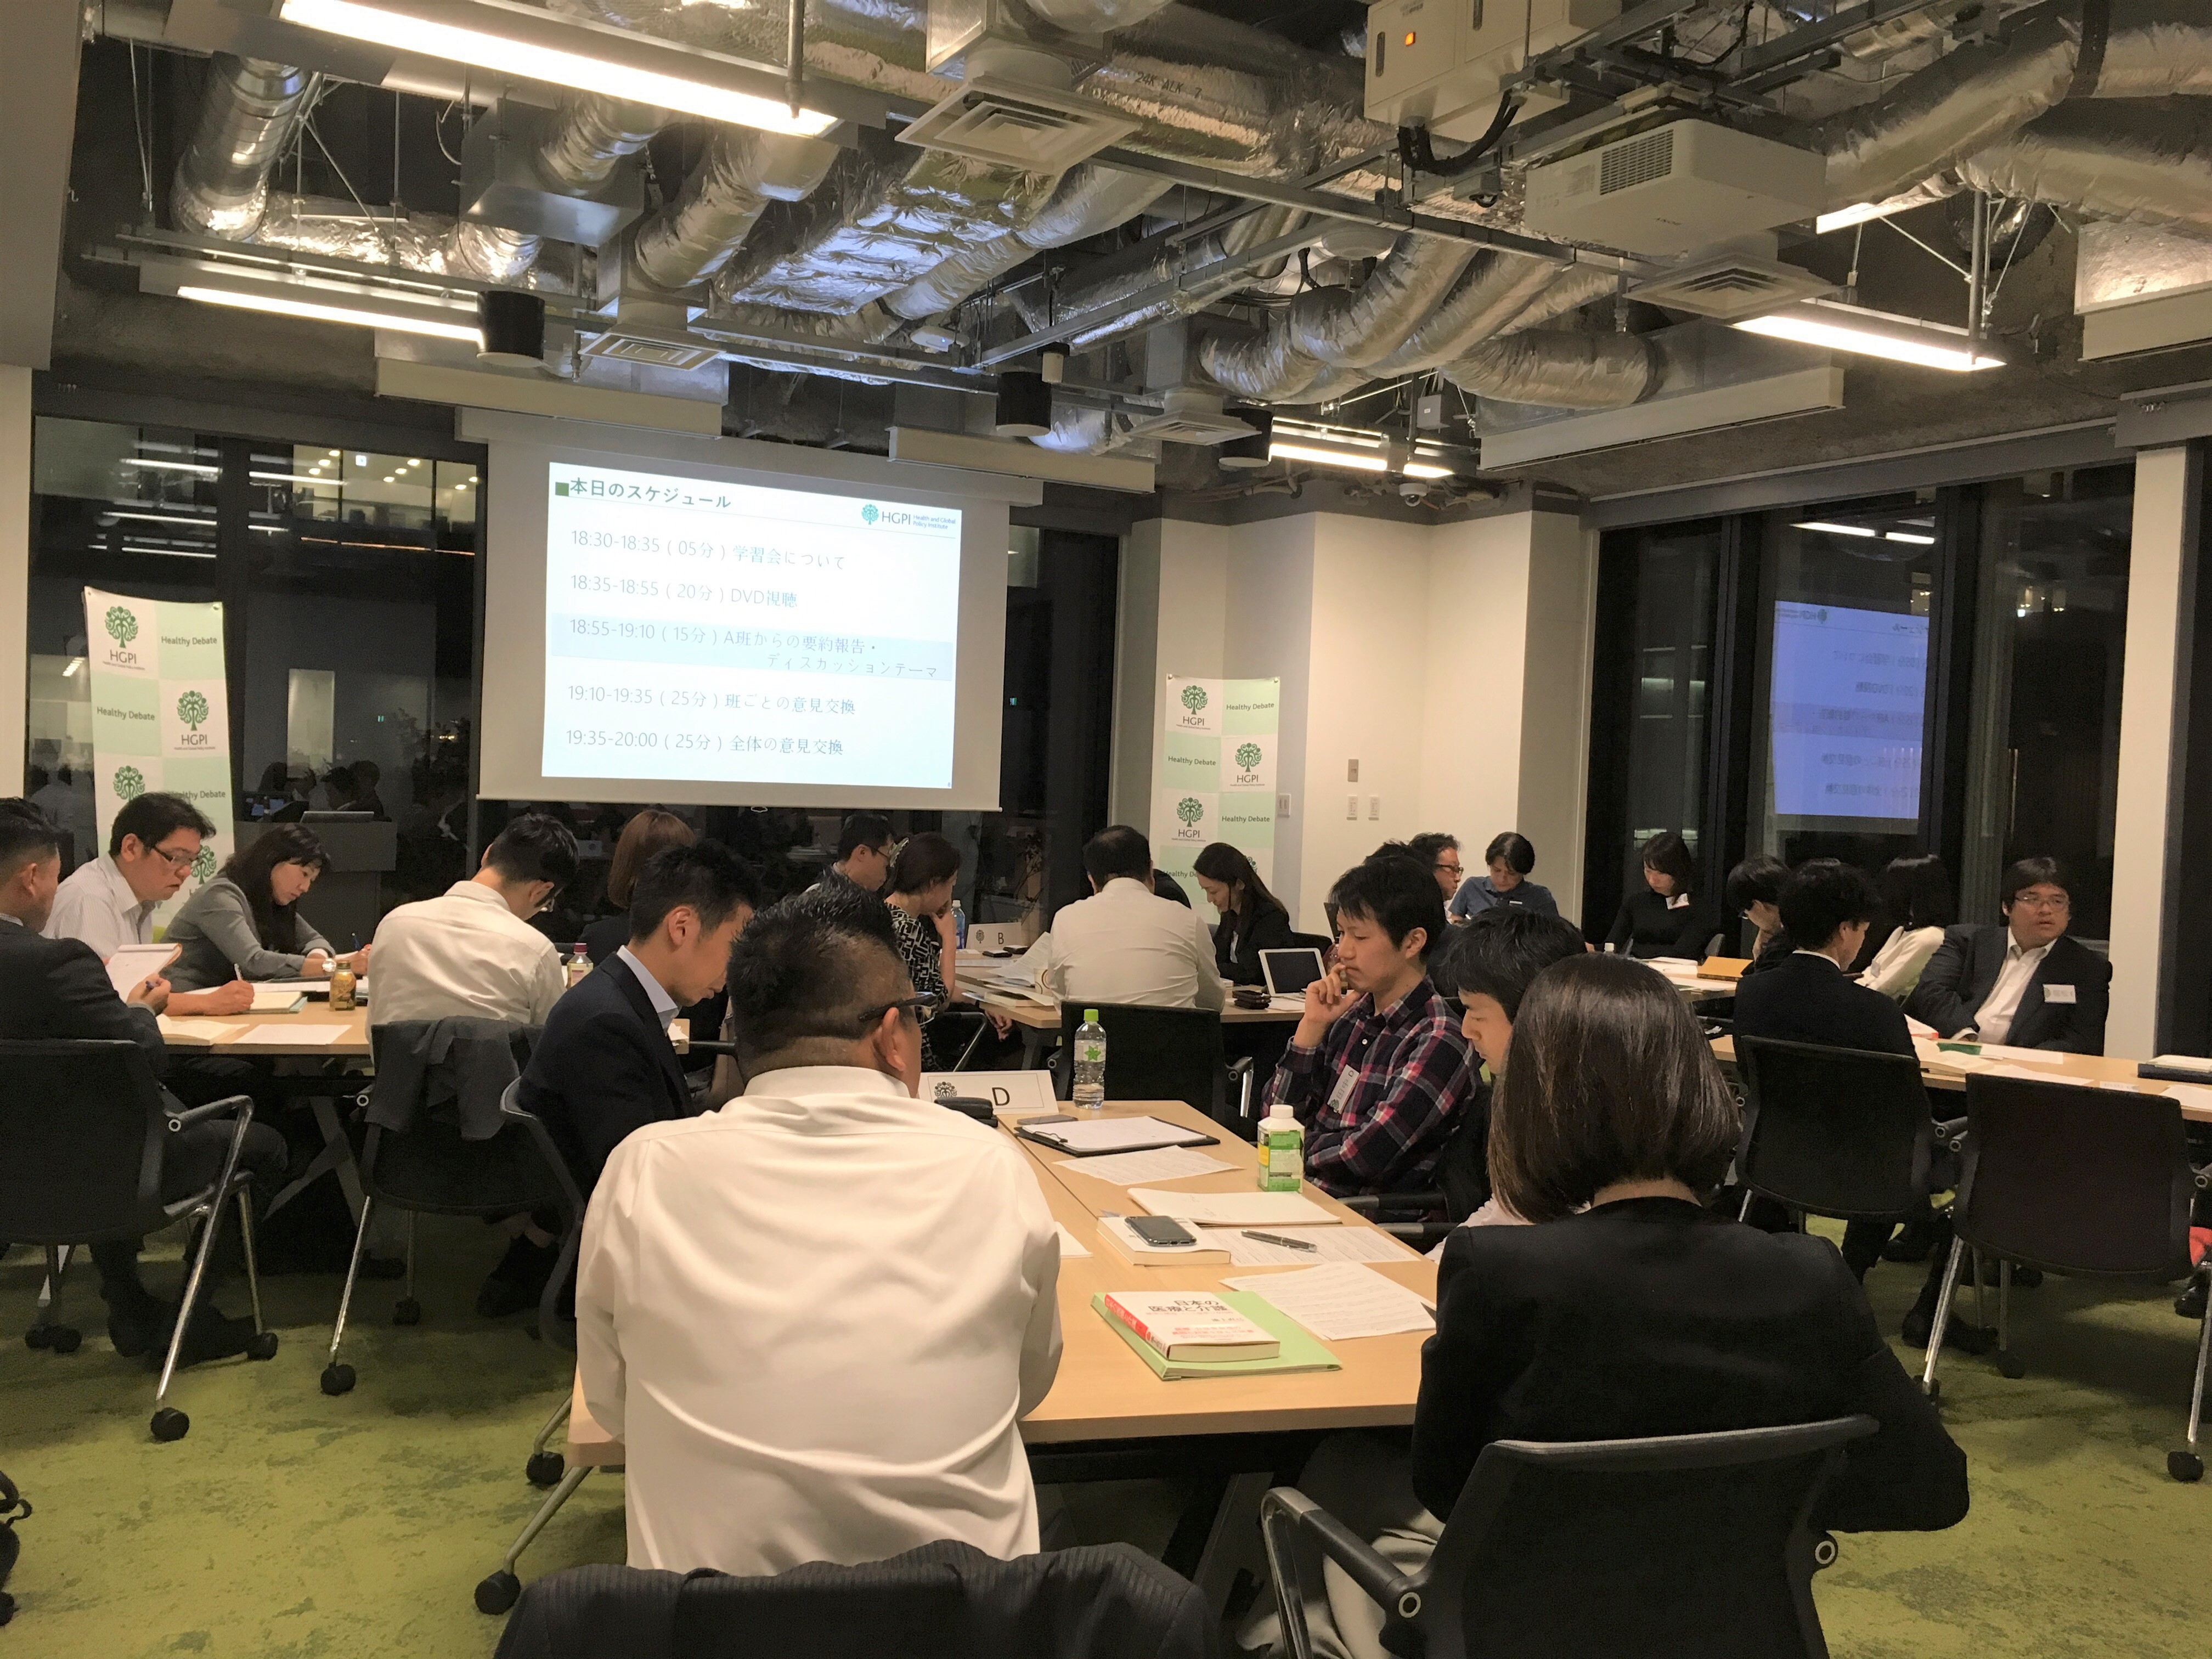 [Event Report] Health Policy Academy, Health Policy 101: Study Group Session 1 (November 7, 2018)